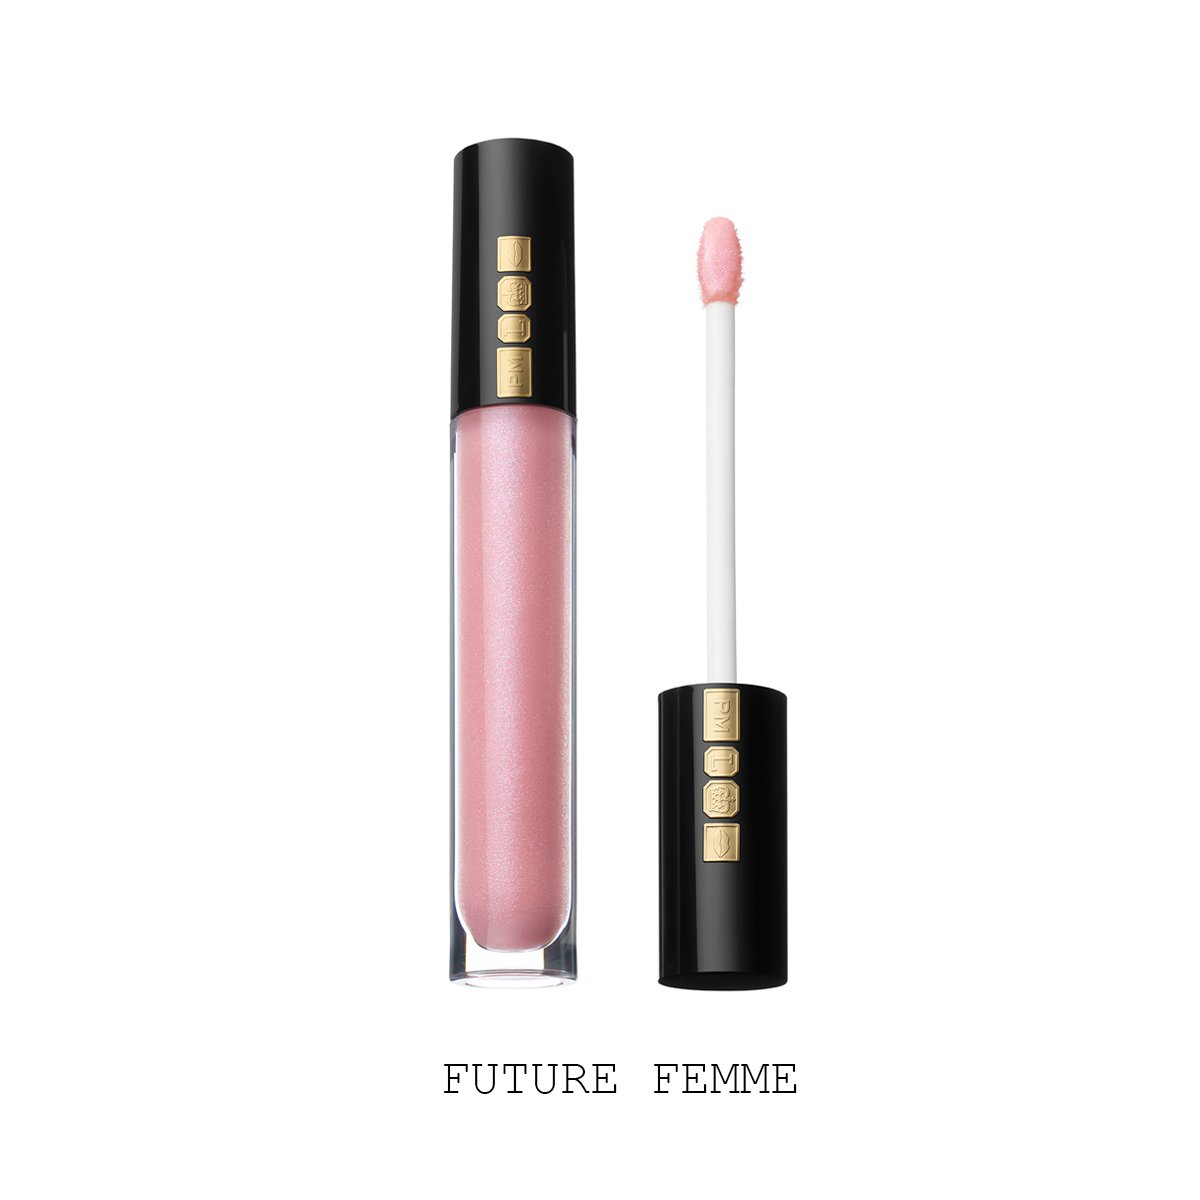 Pat McGrath Lust: Gloss Lip Gloss - Future Femme (Pastel Pink with Iridescent Pearl)